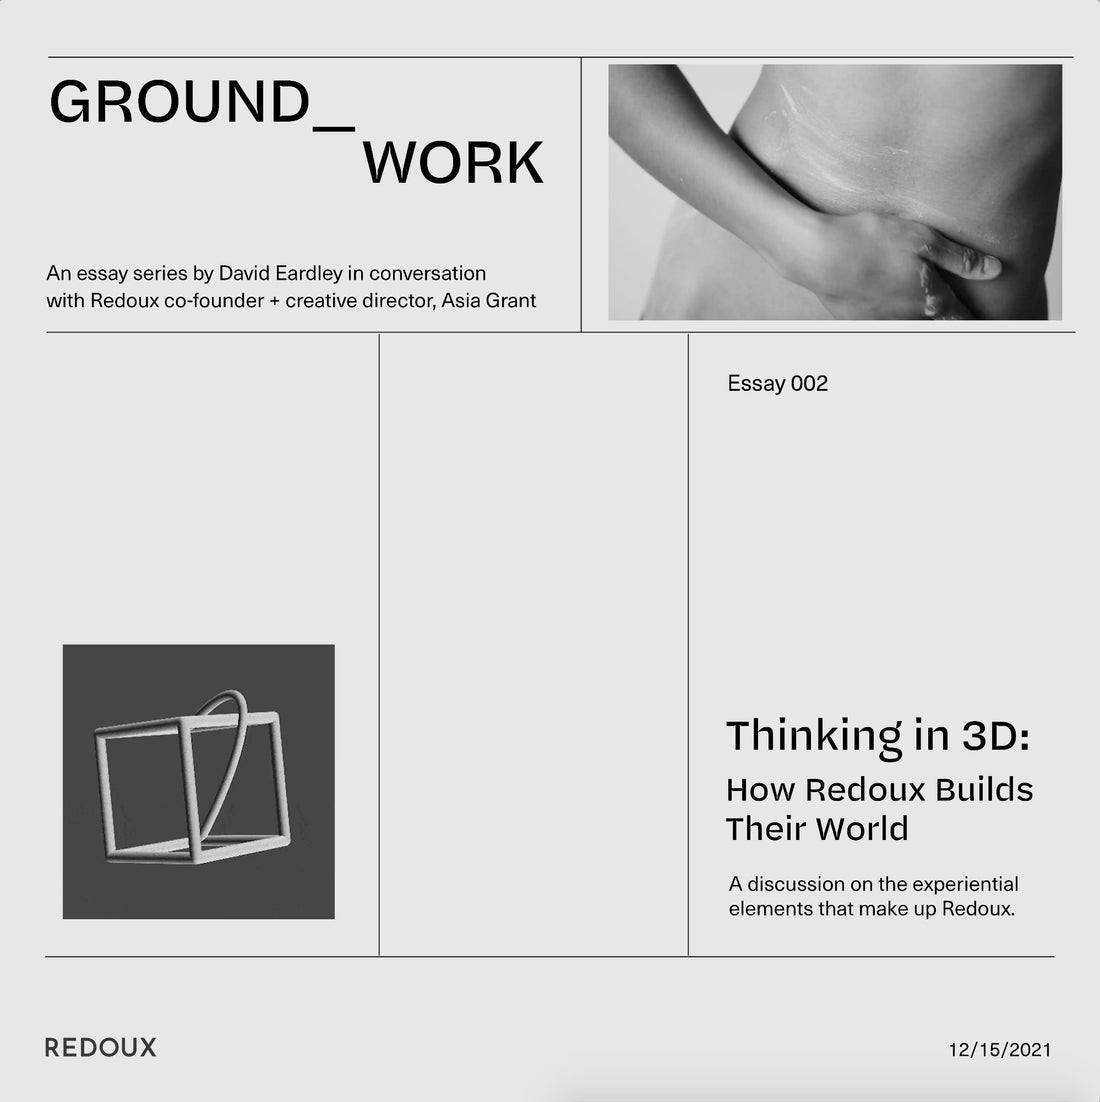 GROUND_WORK 02: Thinking in 3D - How Redoux Builds Their World - Redoux